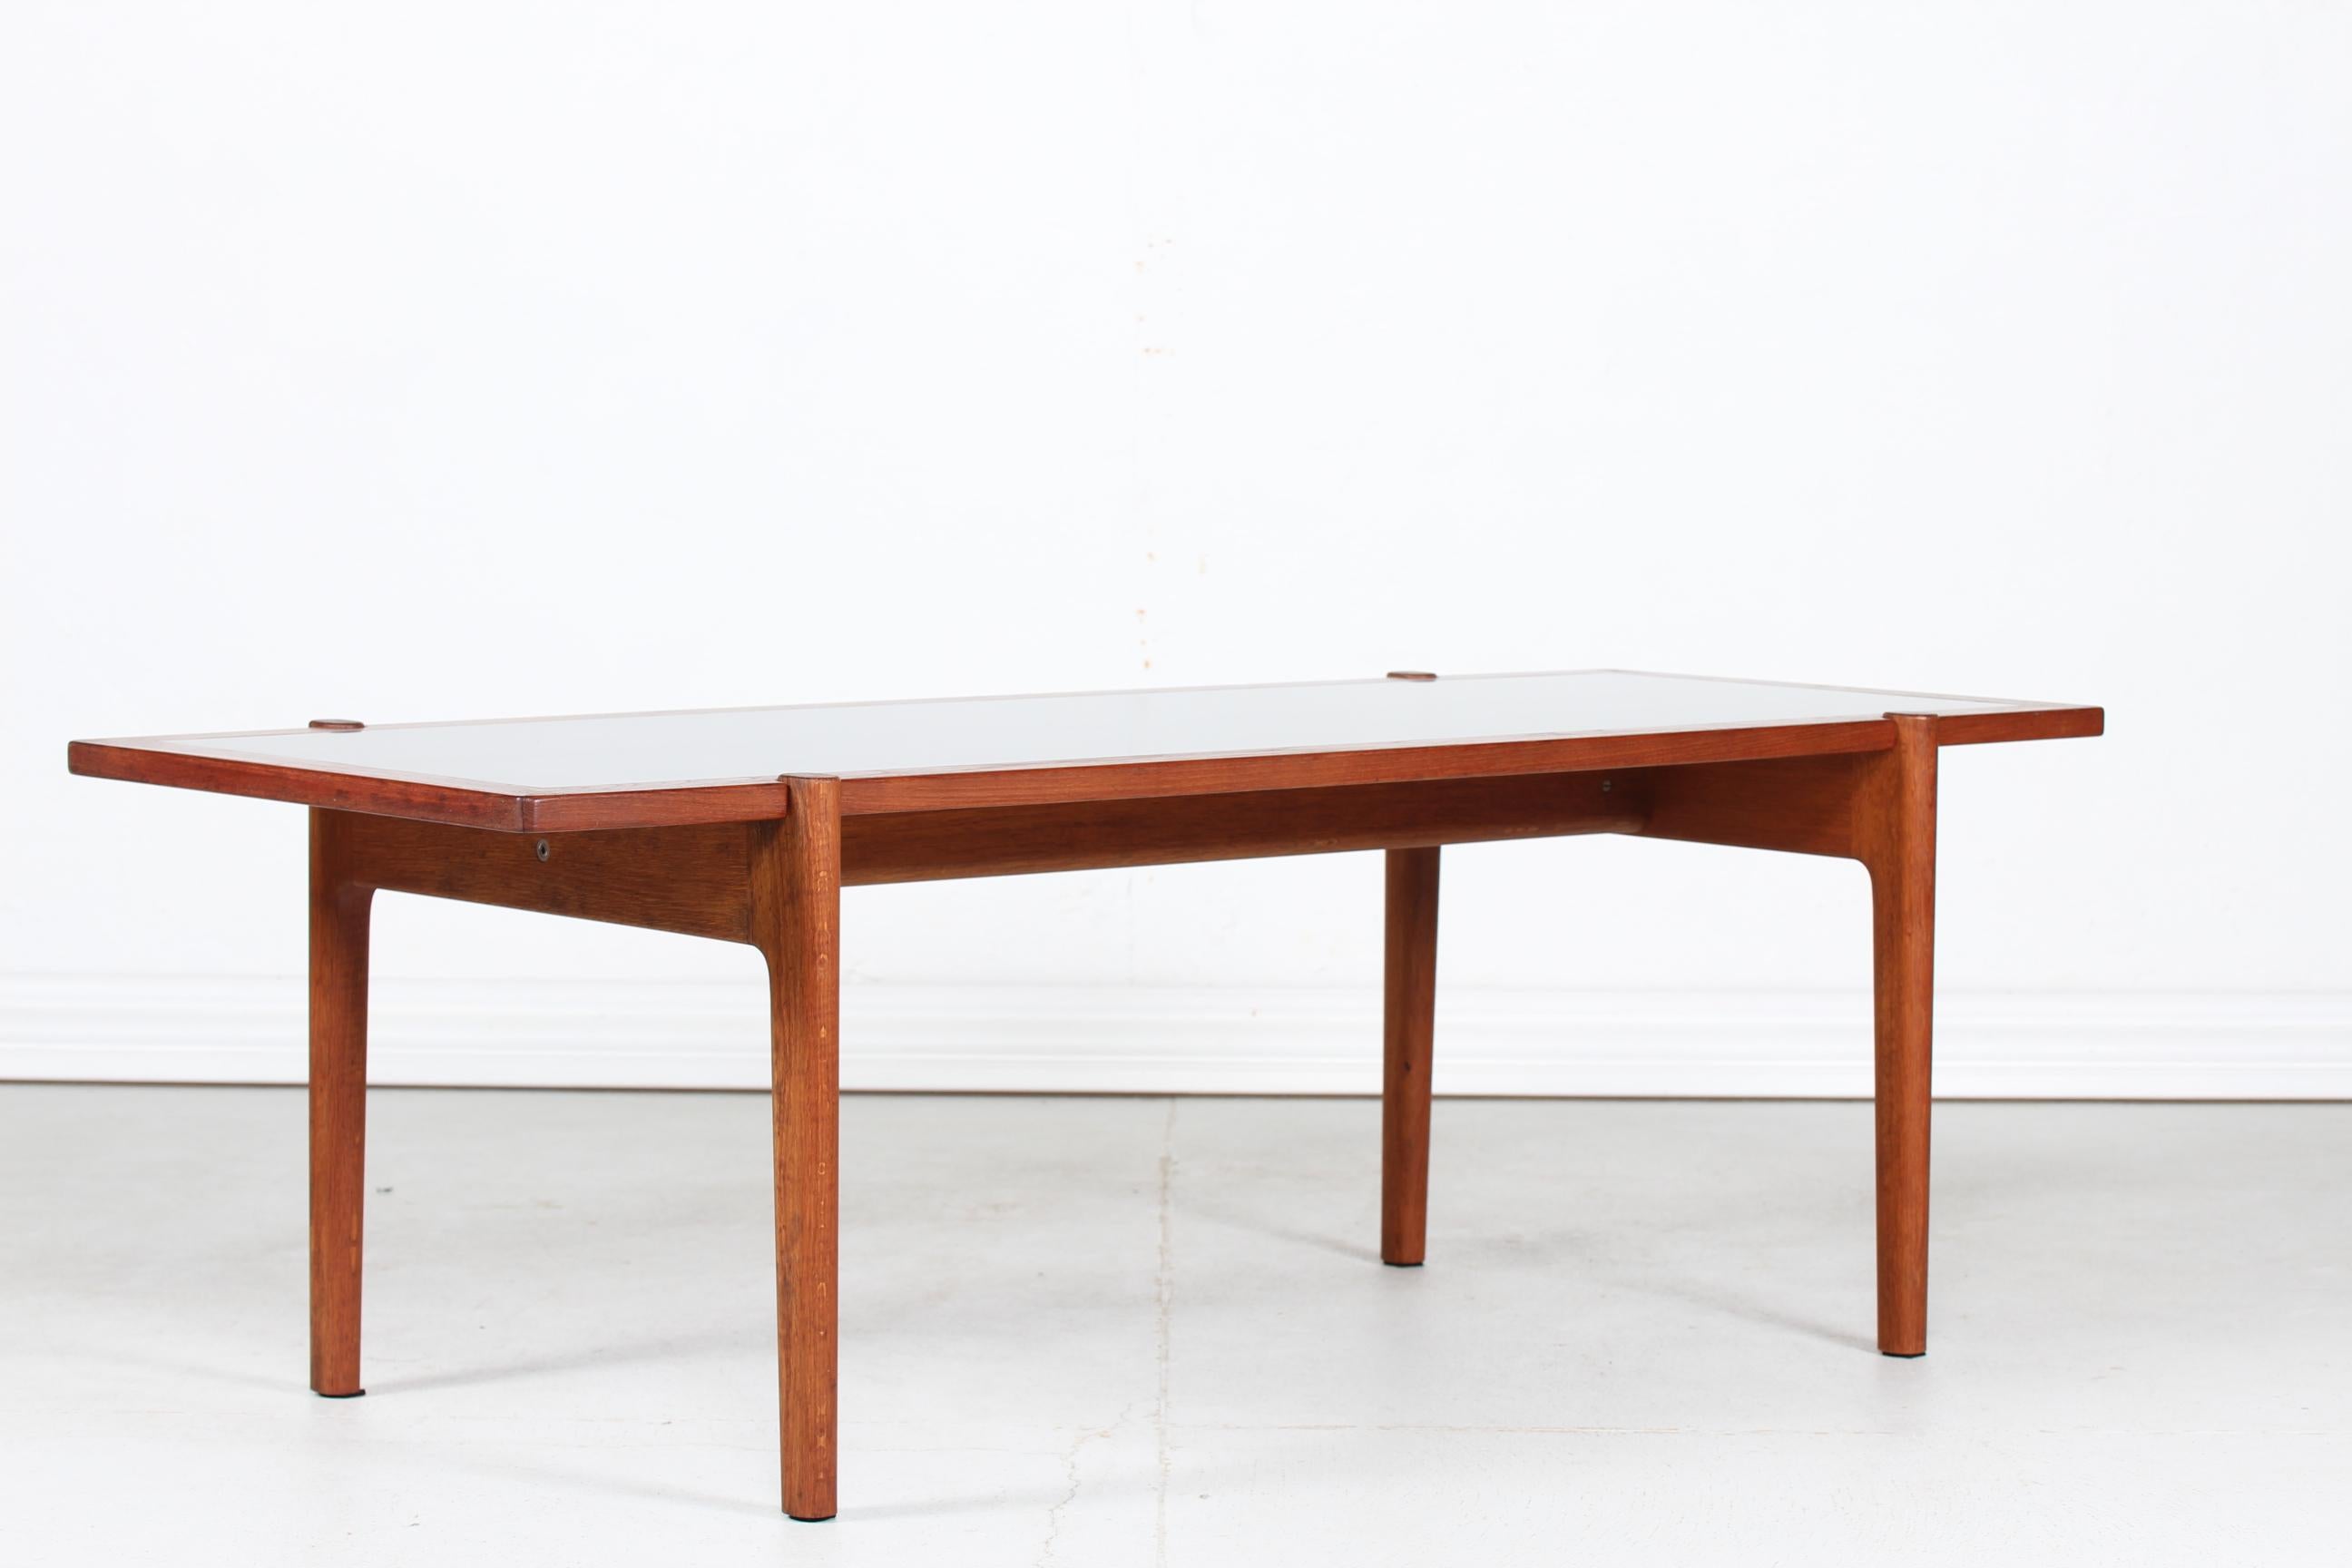 Coffee table by the Danish architect Hans J. Wegner (1914-2007) and manufactured by Johannes Hansen, Copenhagen.
The coffee table has a reversible tabletop made of teak with inlaid black formica on one side. 
The frame is made of oak with